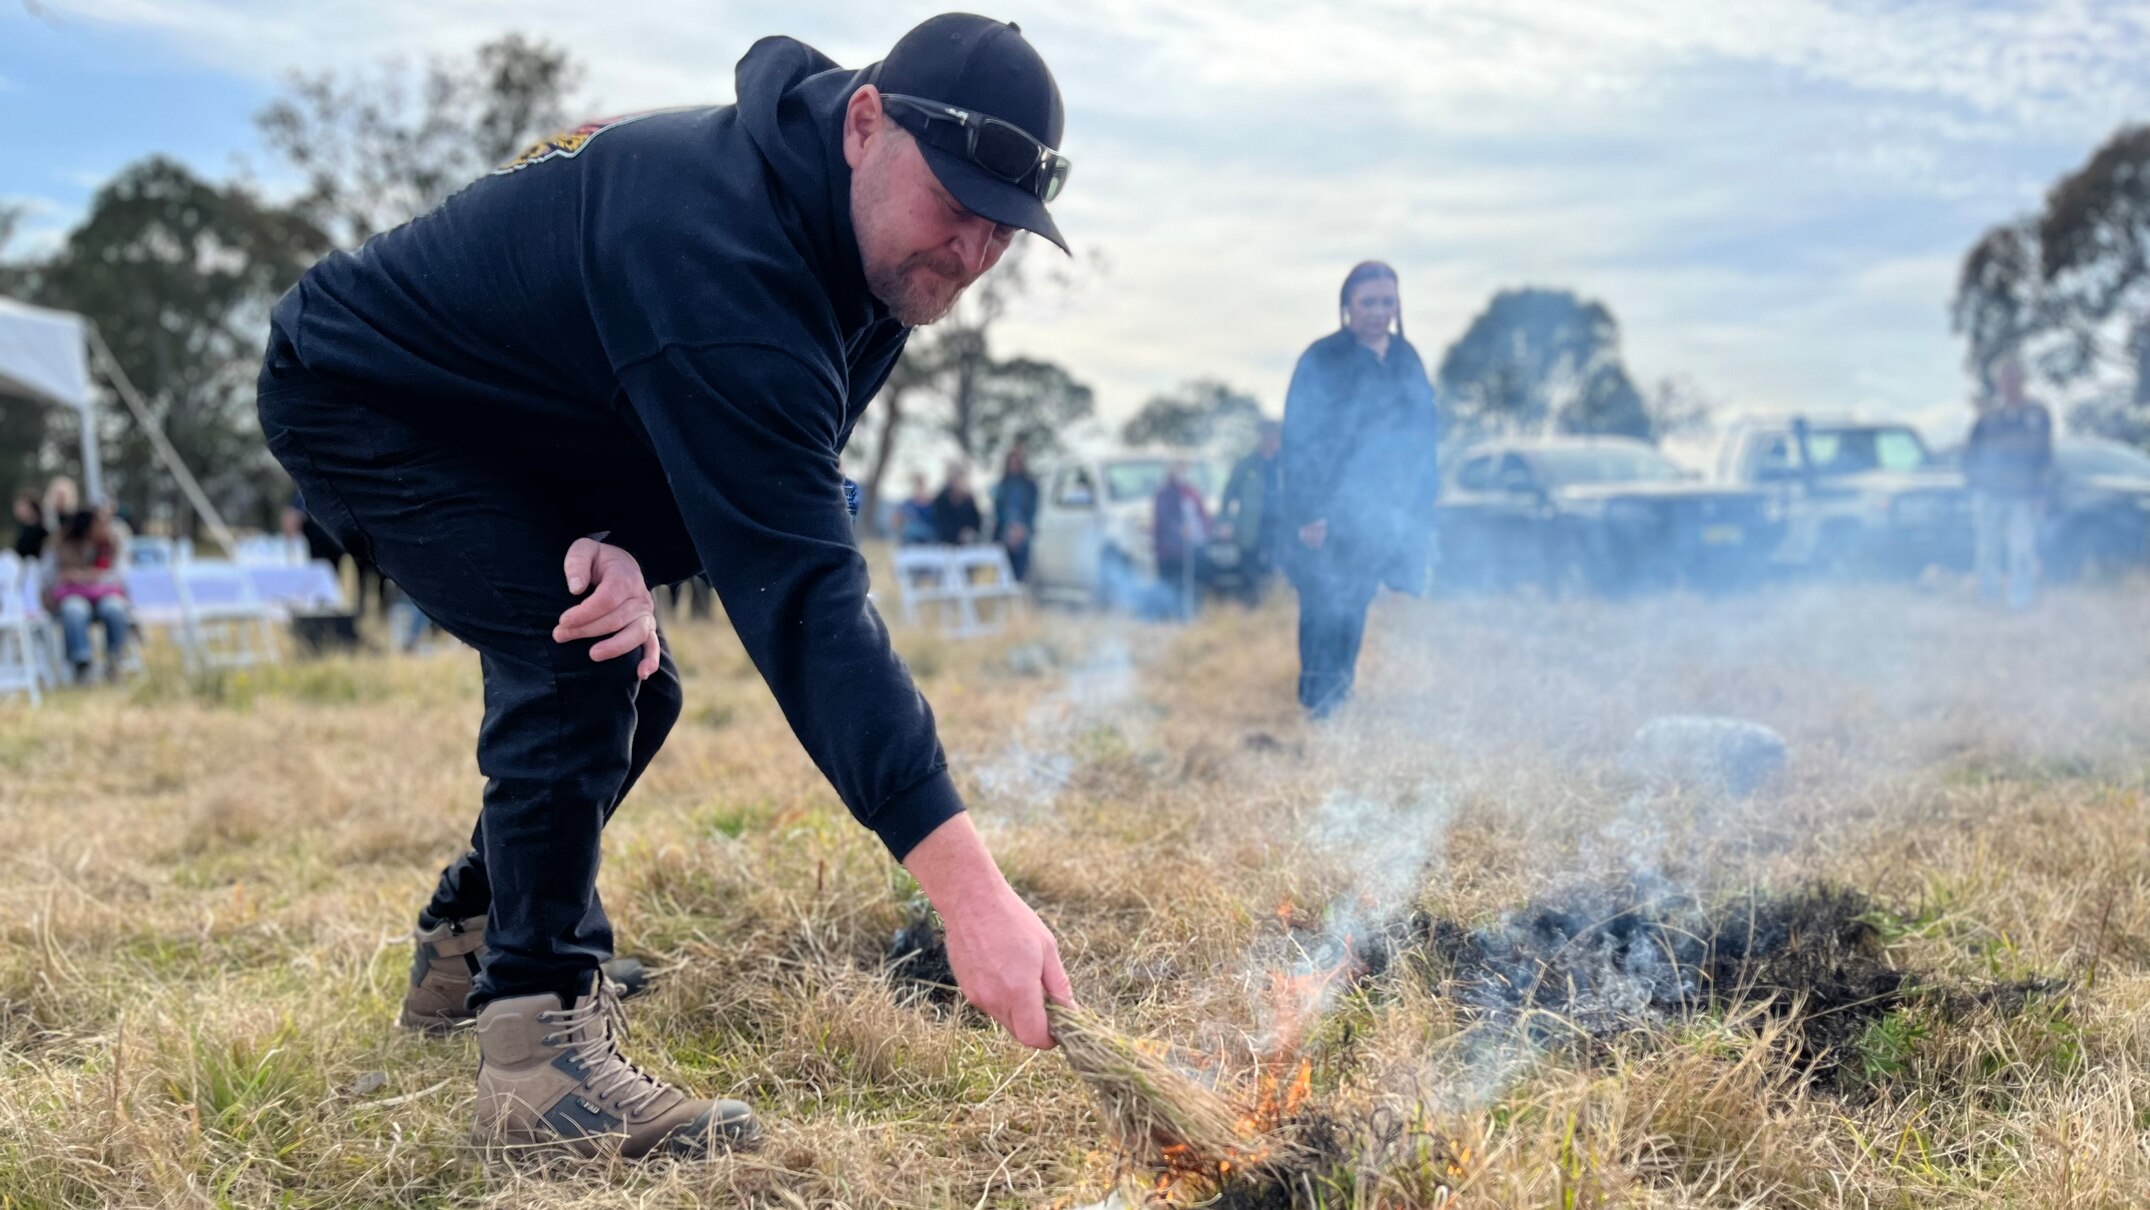 nsw trials cultural burning program to keep roads open during emergencies like black summer